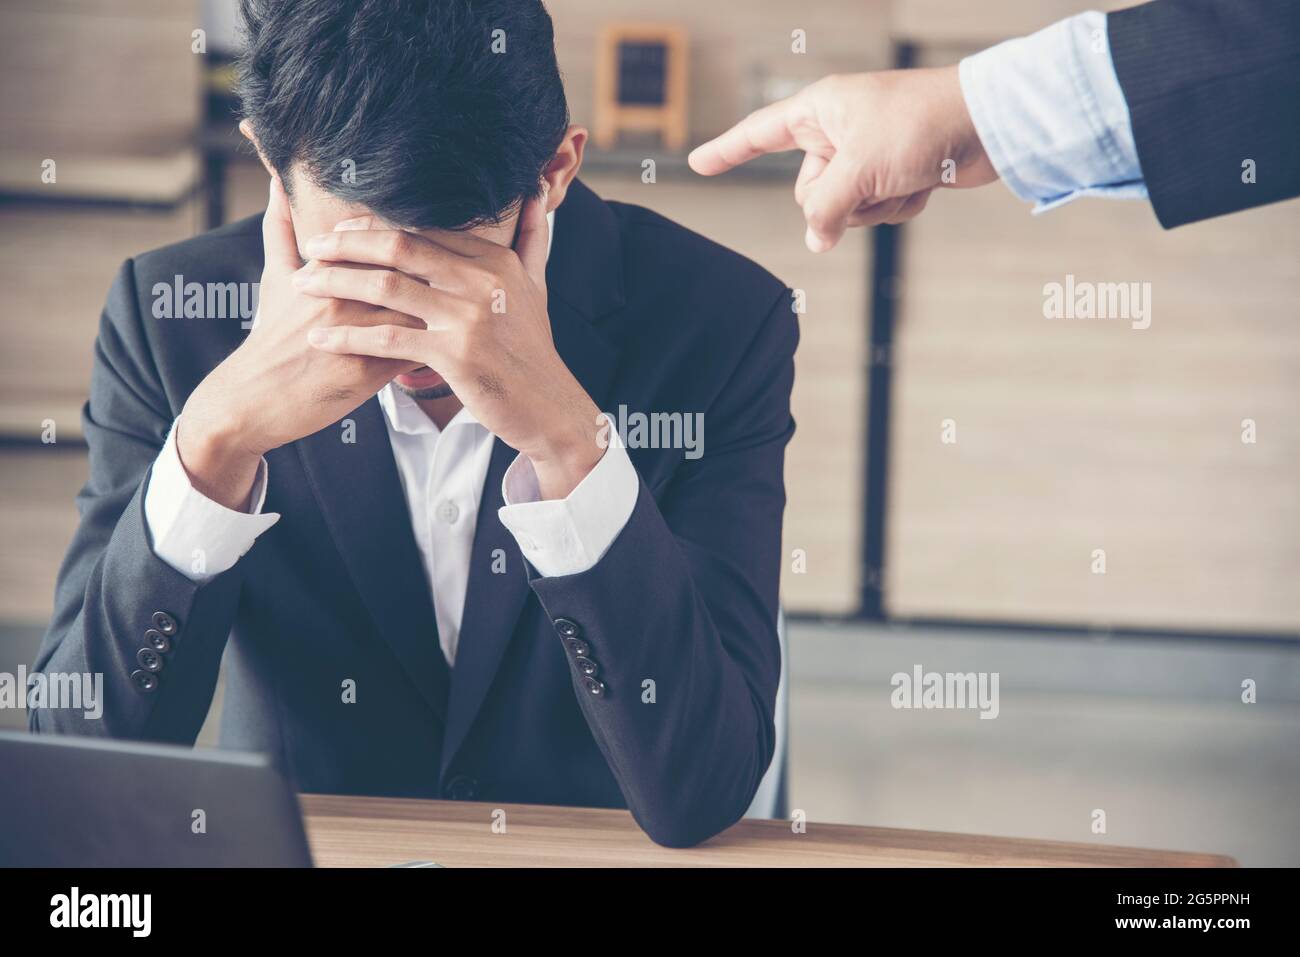 Unemployed Jobless People Crisis who Recession, Stress and lose job. Despair office People feel Stressful in depress situation. Middle aged people des Stock Photo